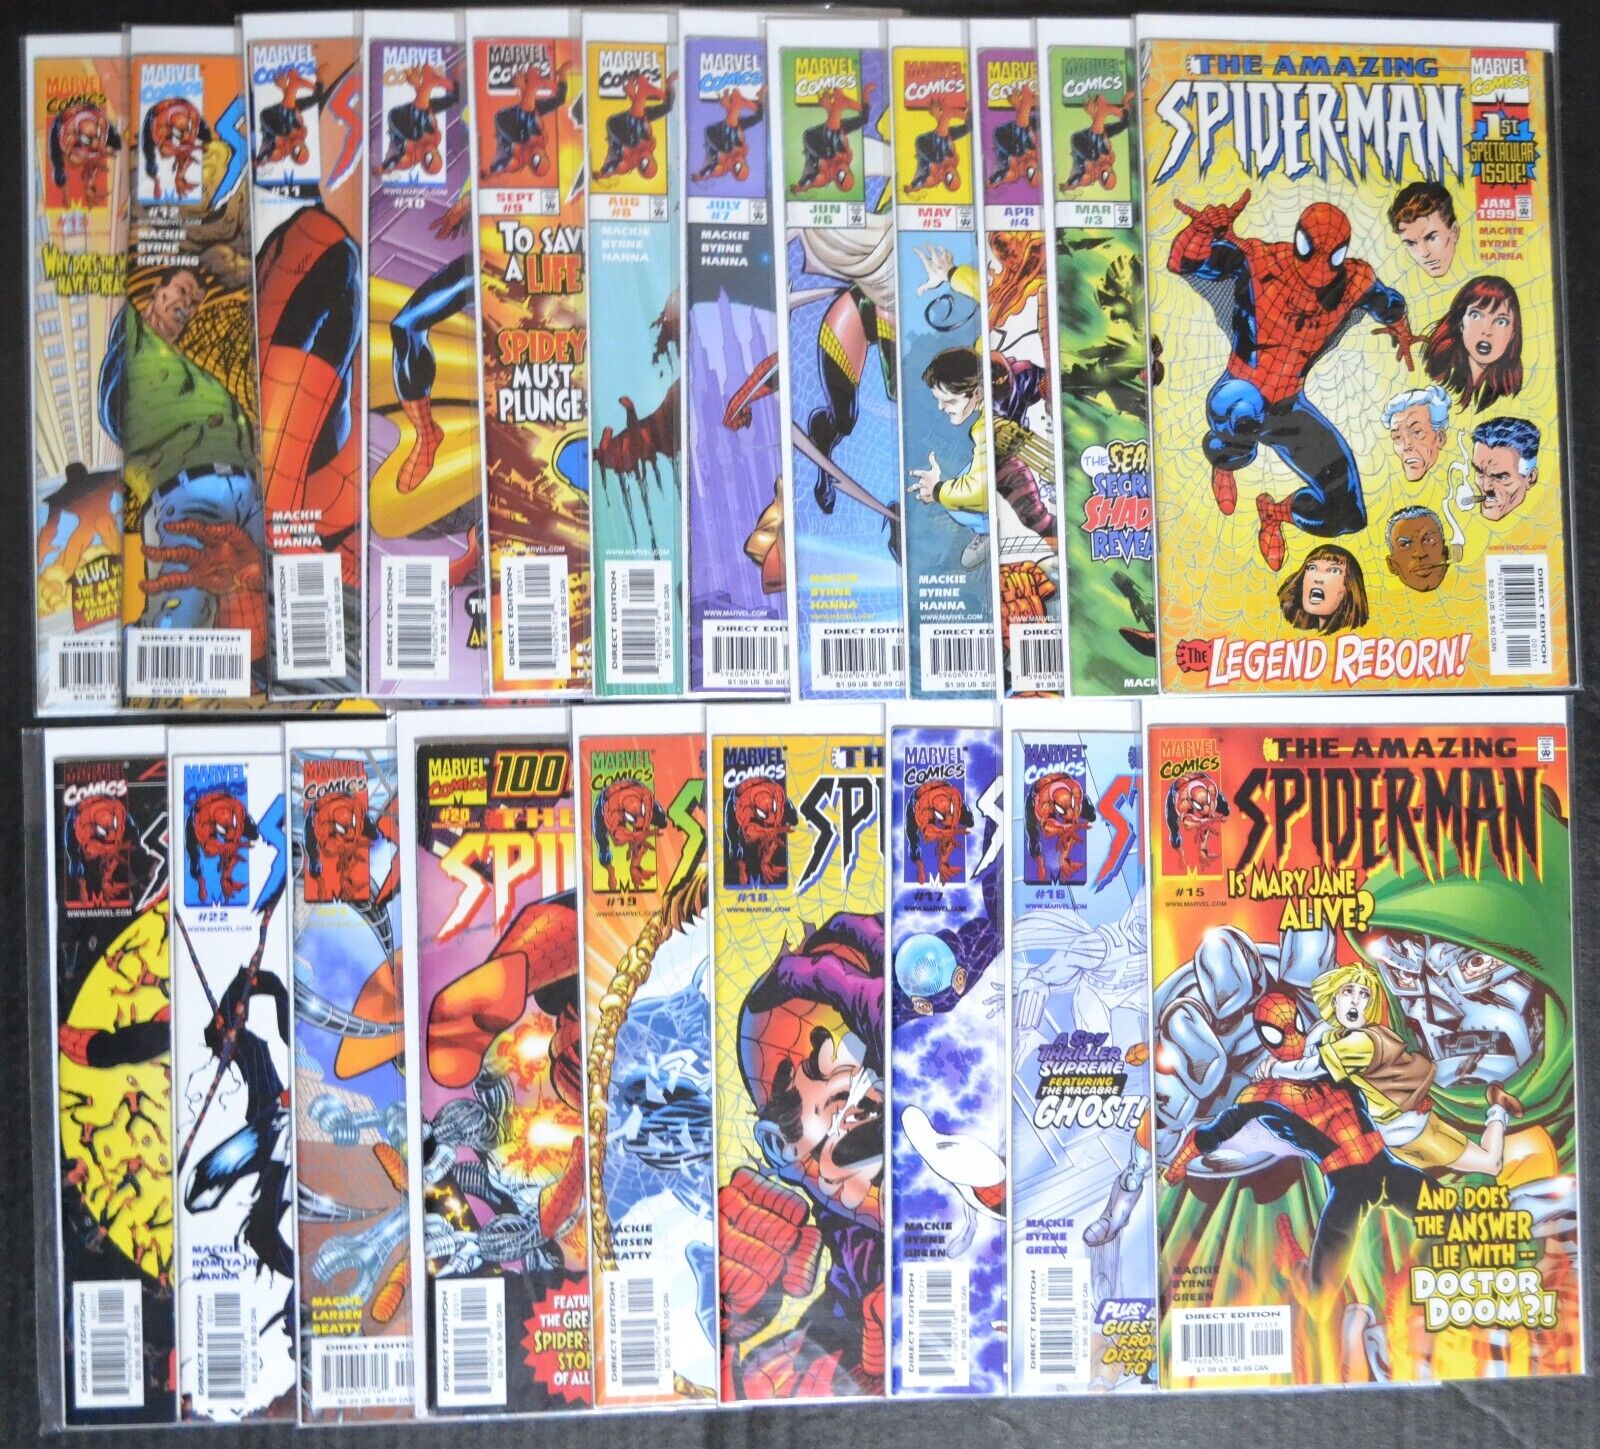 The Amazing Spider-Man (Marvel Comics) Volume 2; Key Issues and 1st Appearances